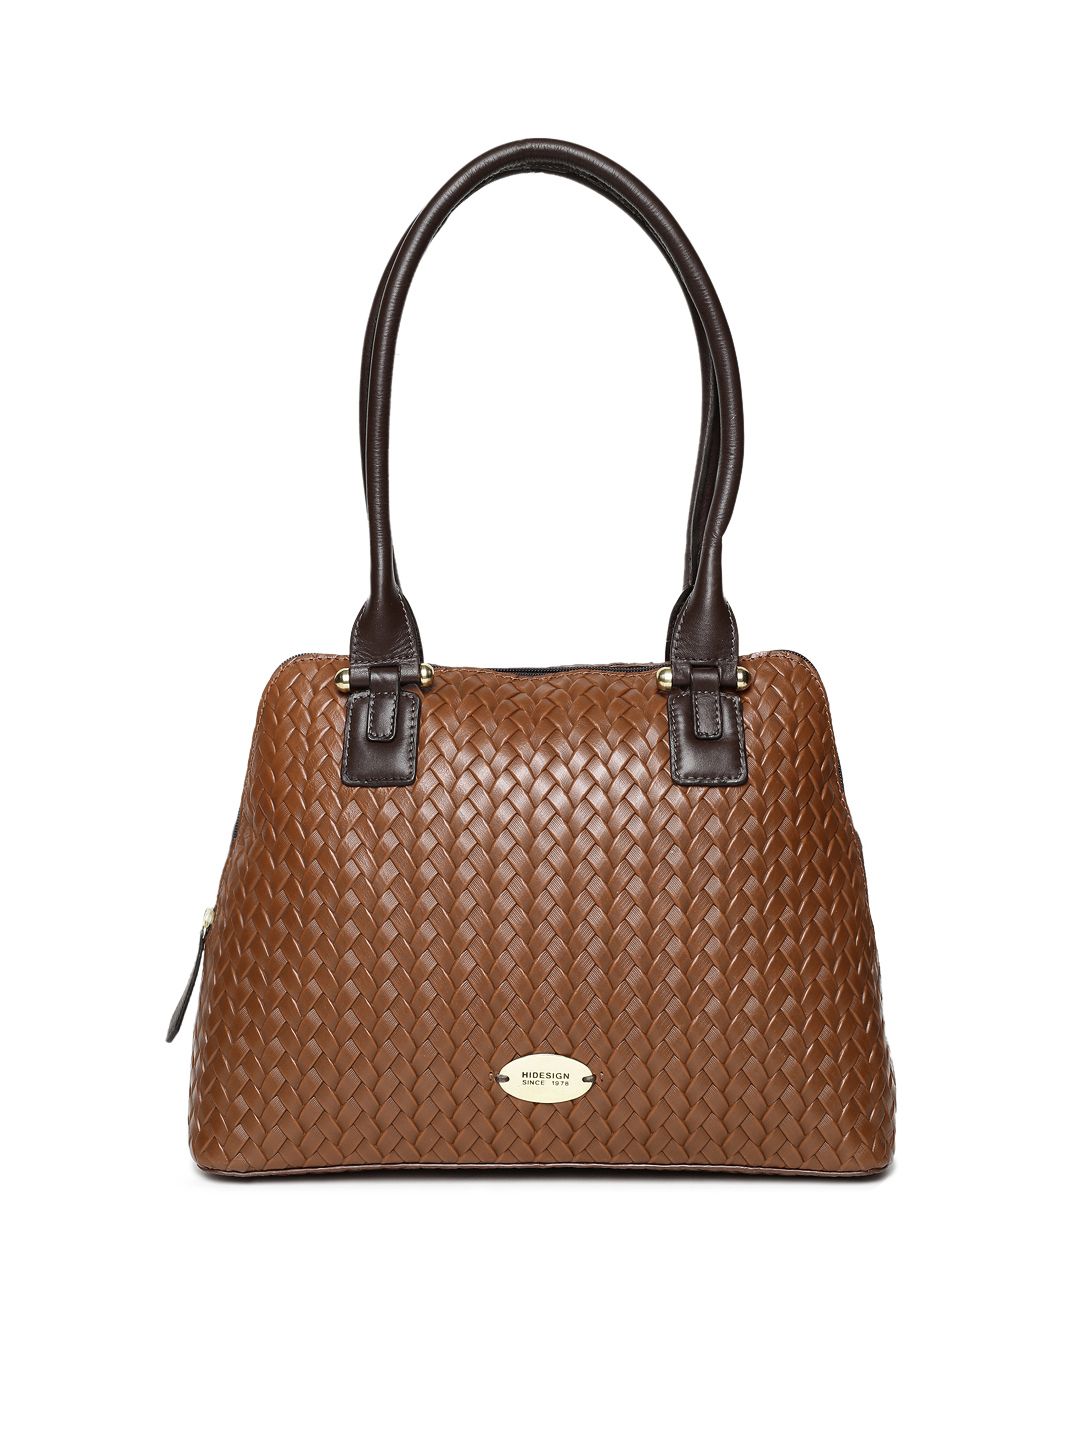 Hidesign Tan Brown Textured Leather Shoulder Bag Price in India